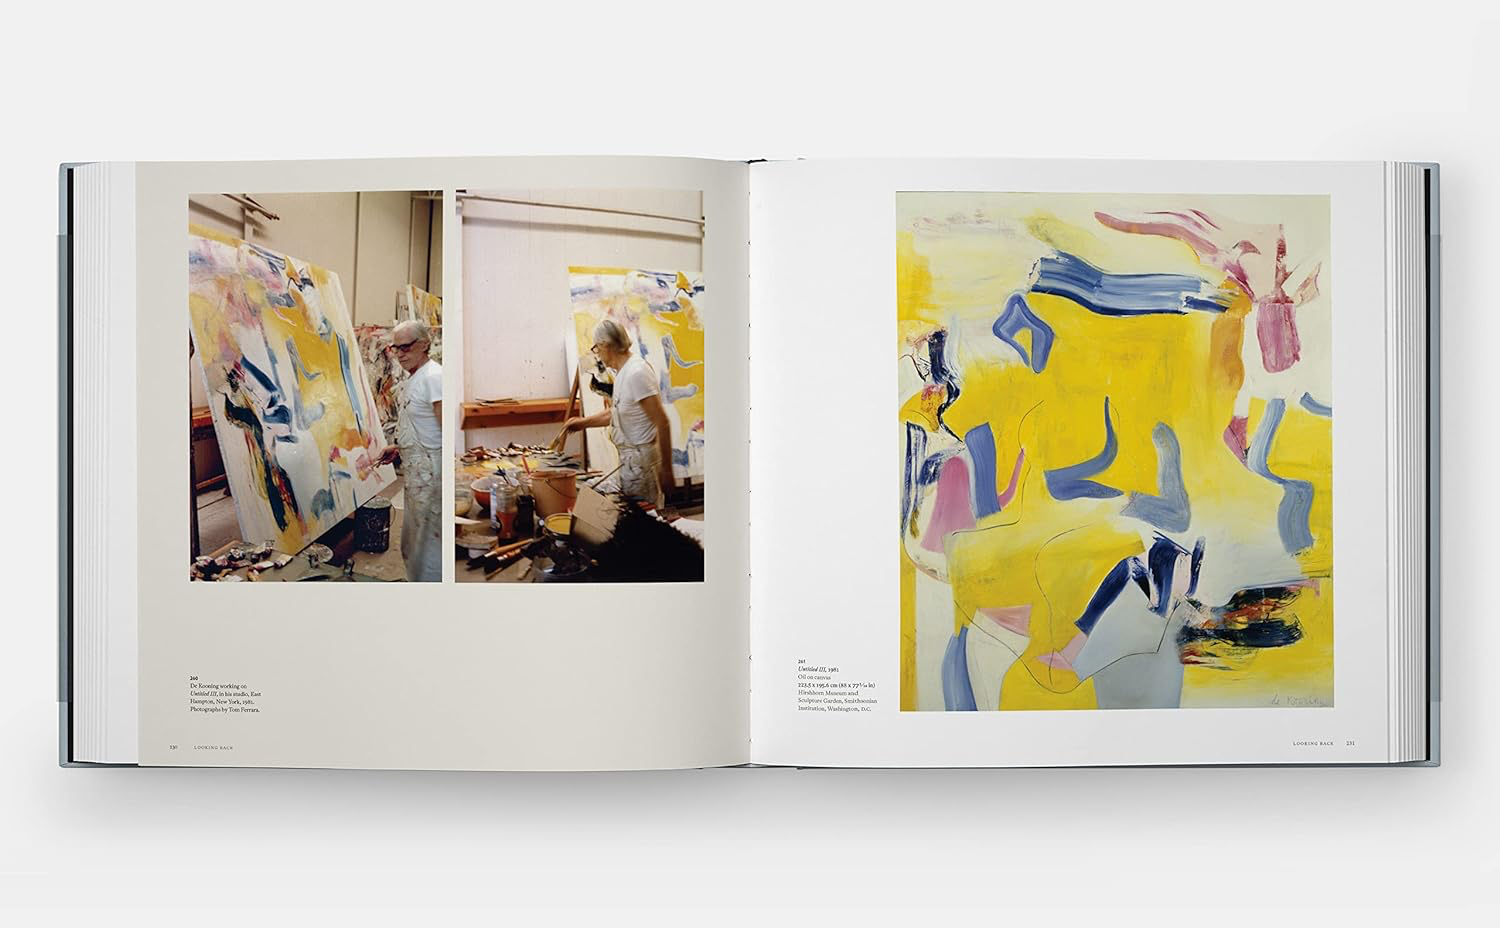 “A Way of Living: The Art of Willem de Kooning” Pages 230 and 231